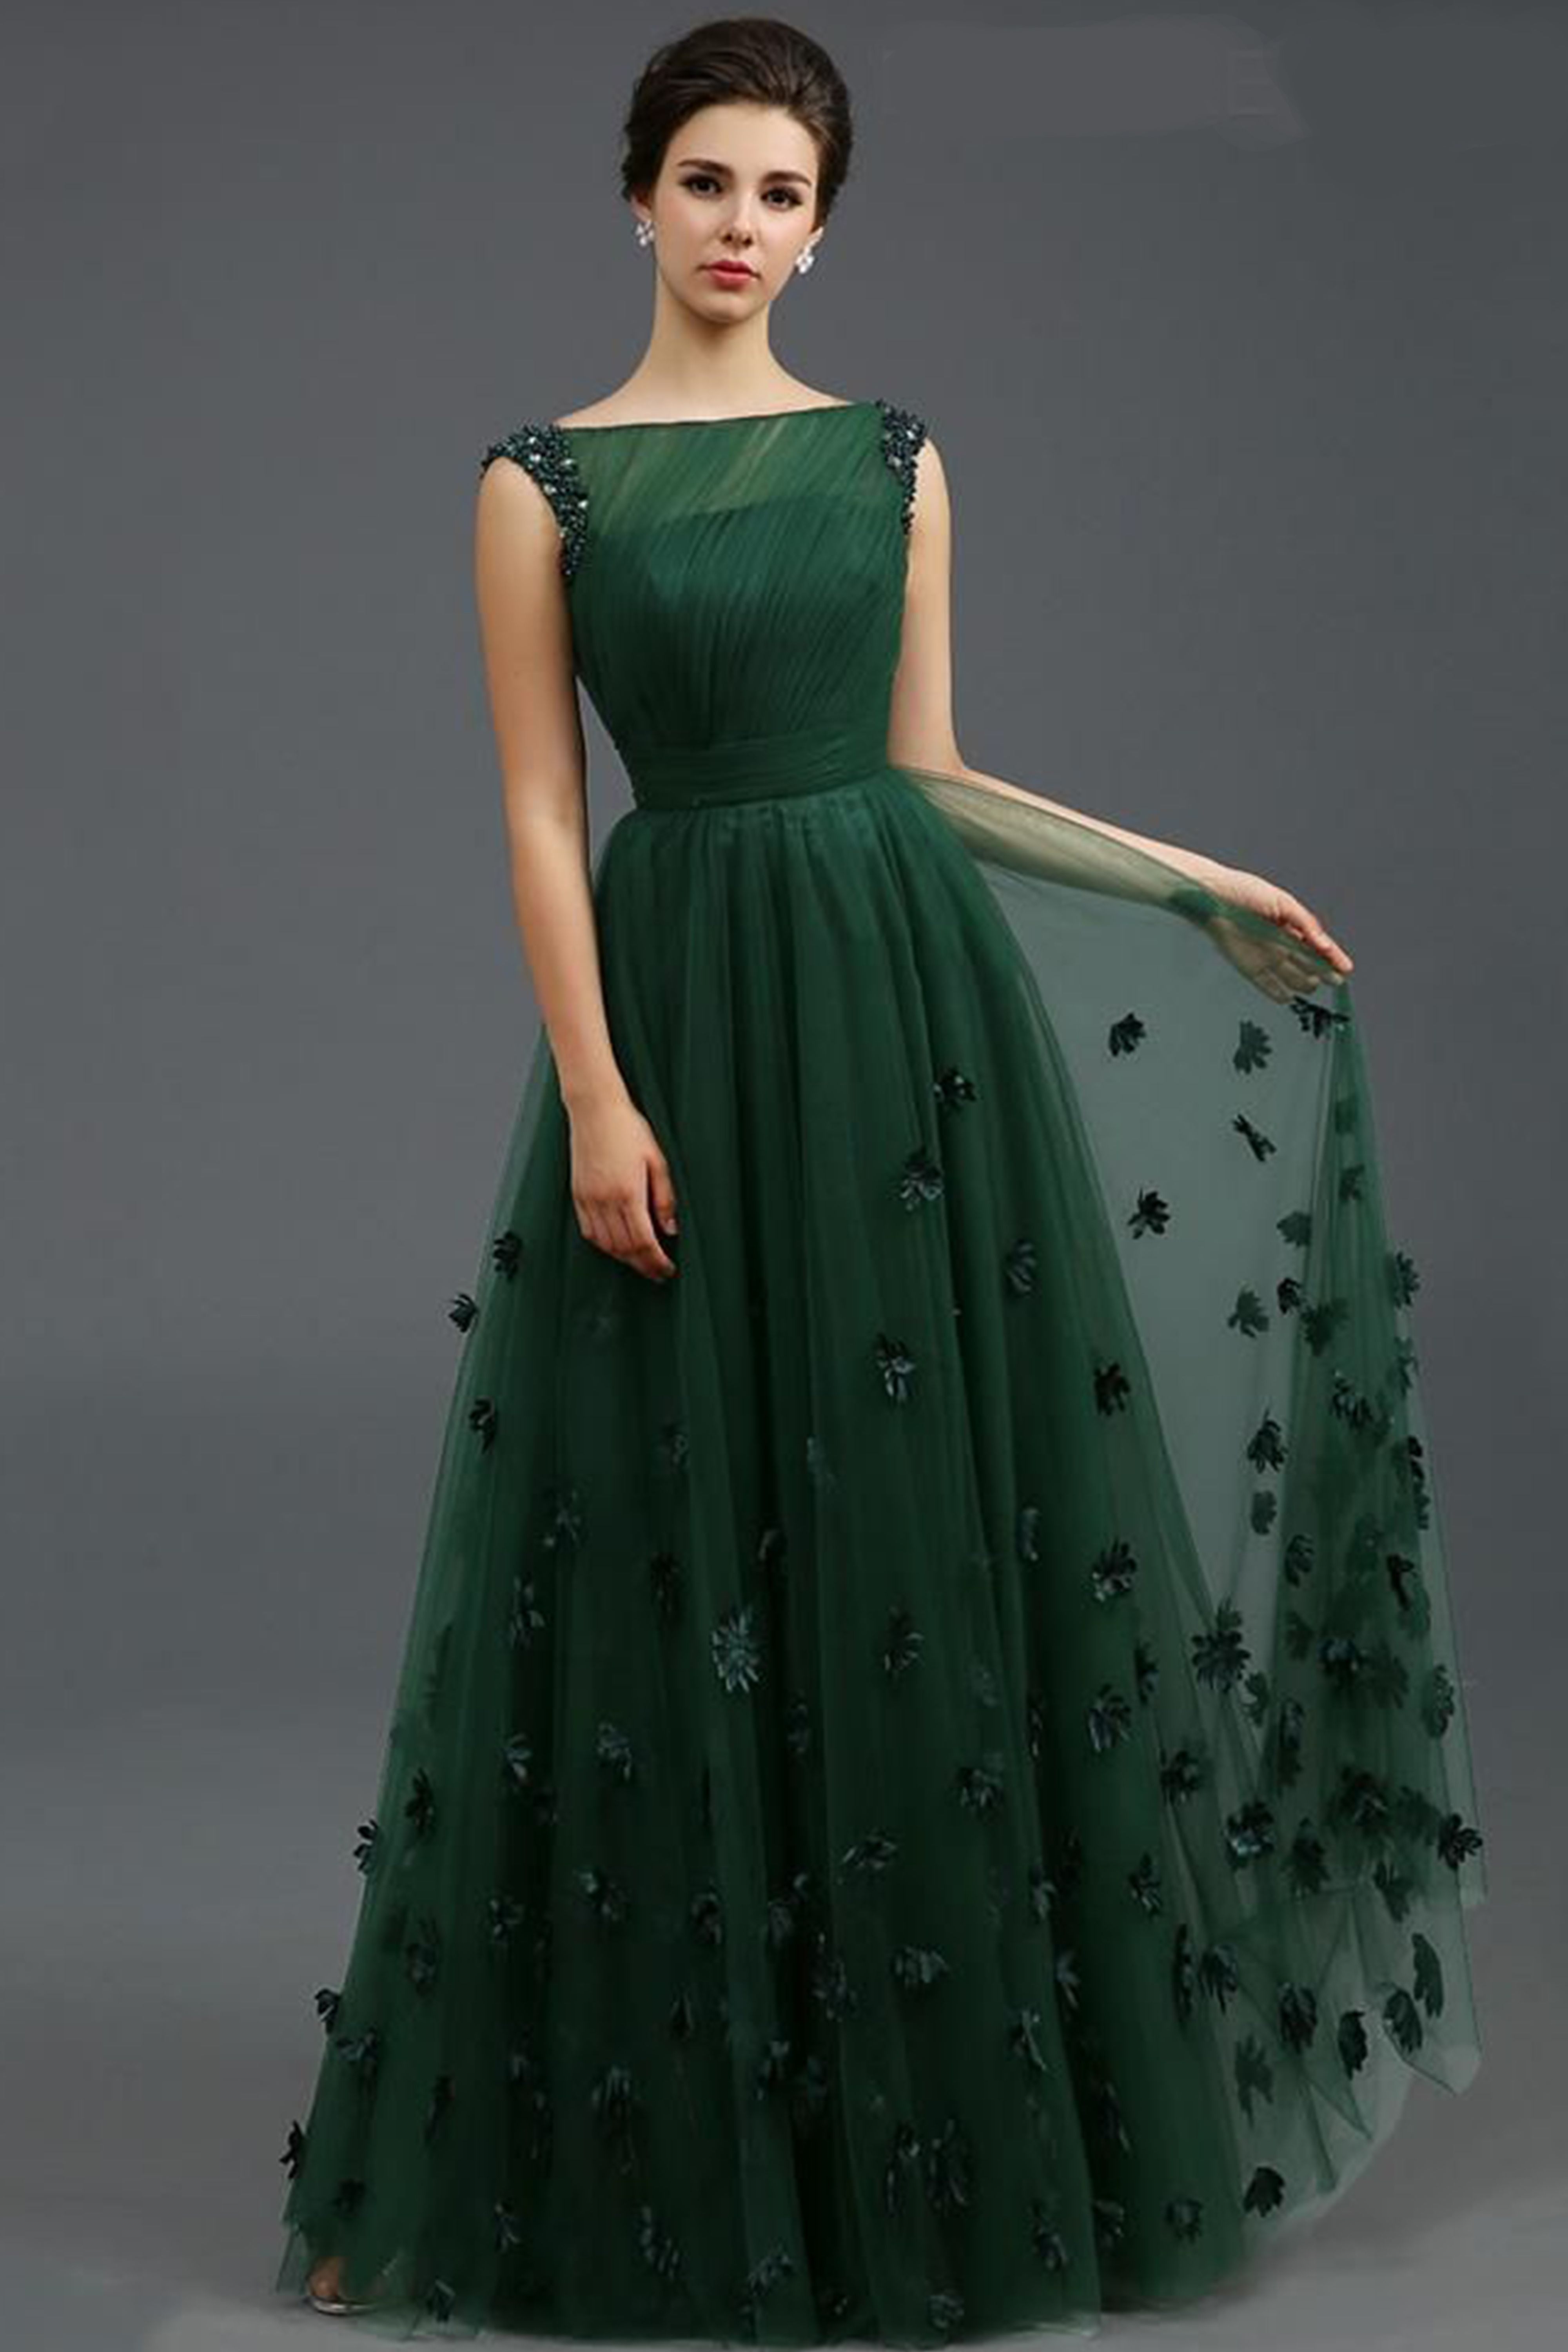 Simple long Party wear gown - Evilato Online Shopping